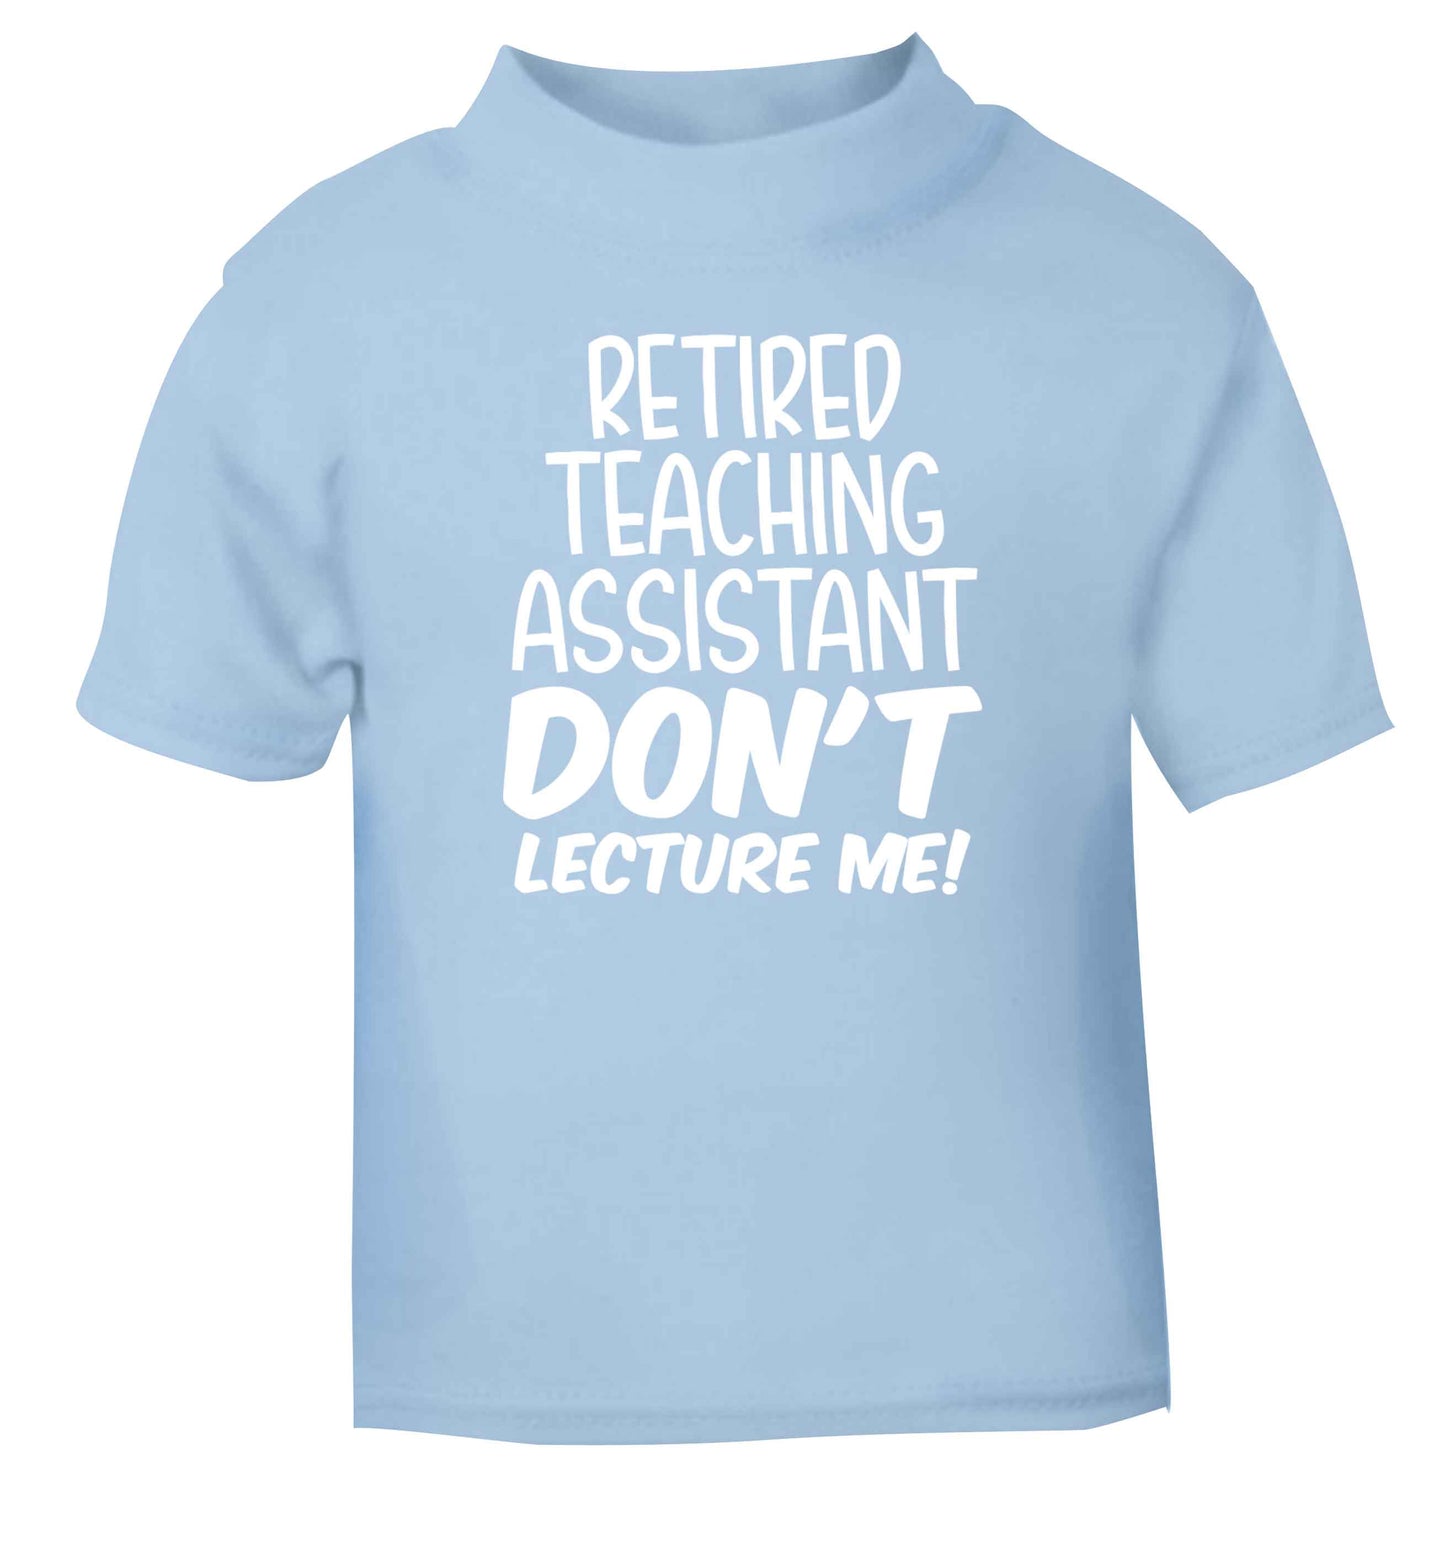 Retired teaching assistant don't lecture me light blue Baby Toddler Tshirt 2 Years